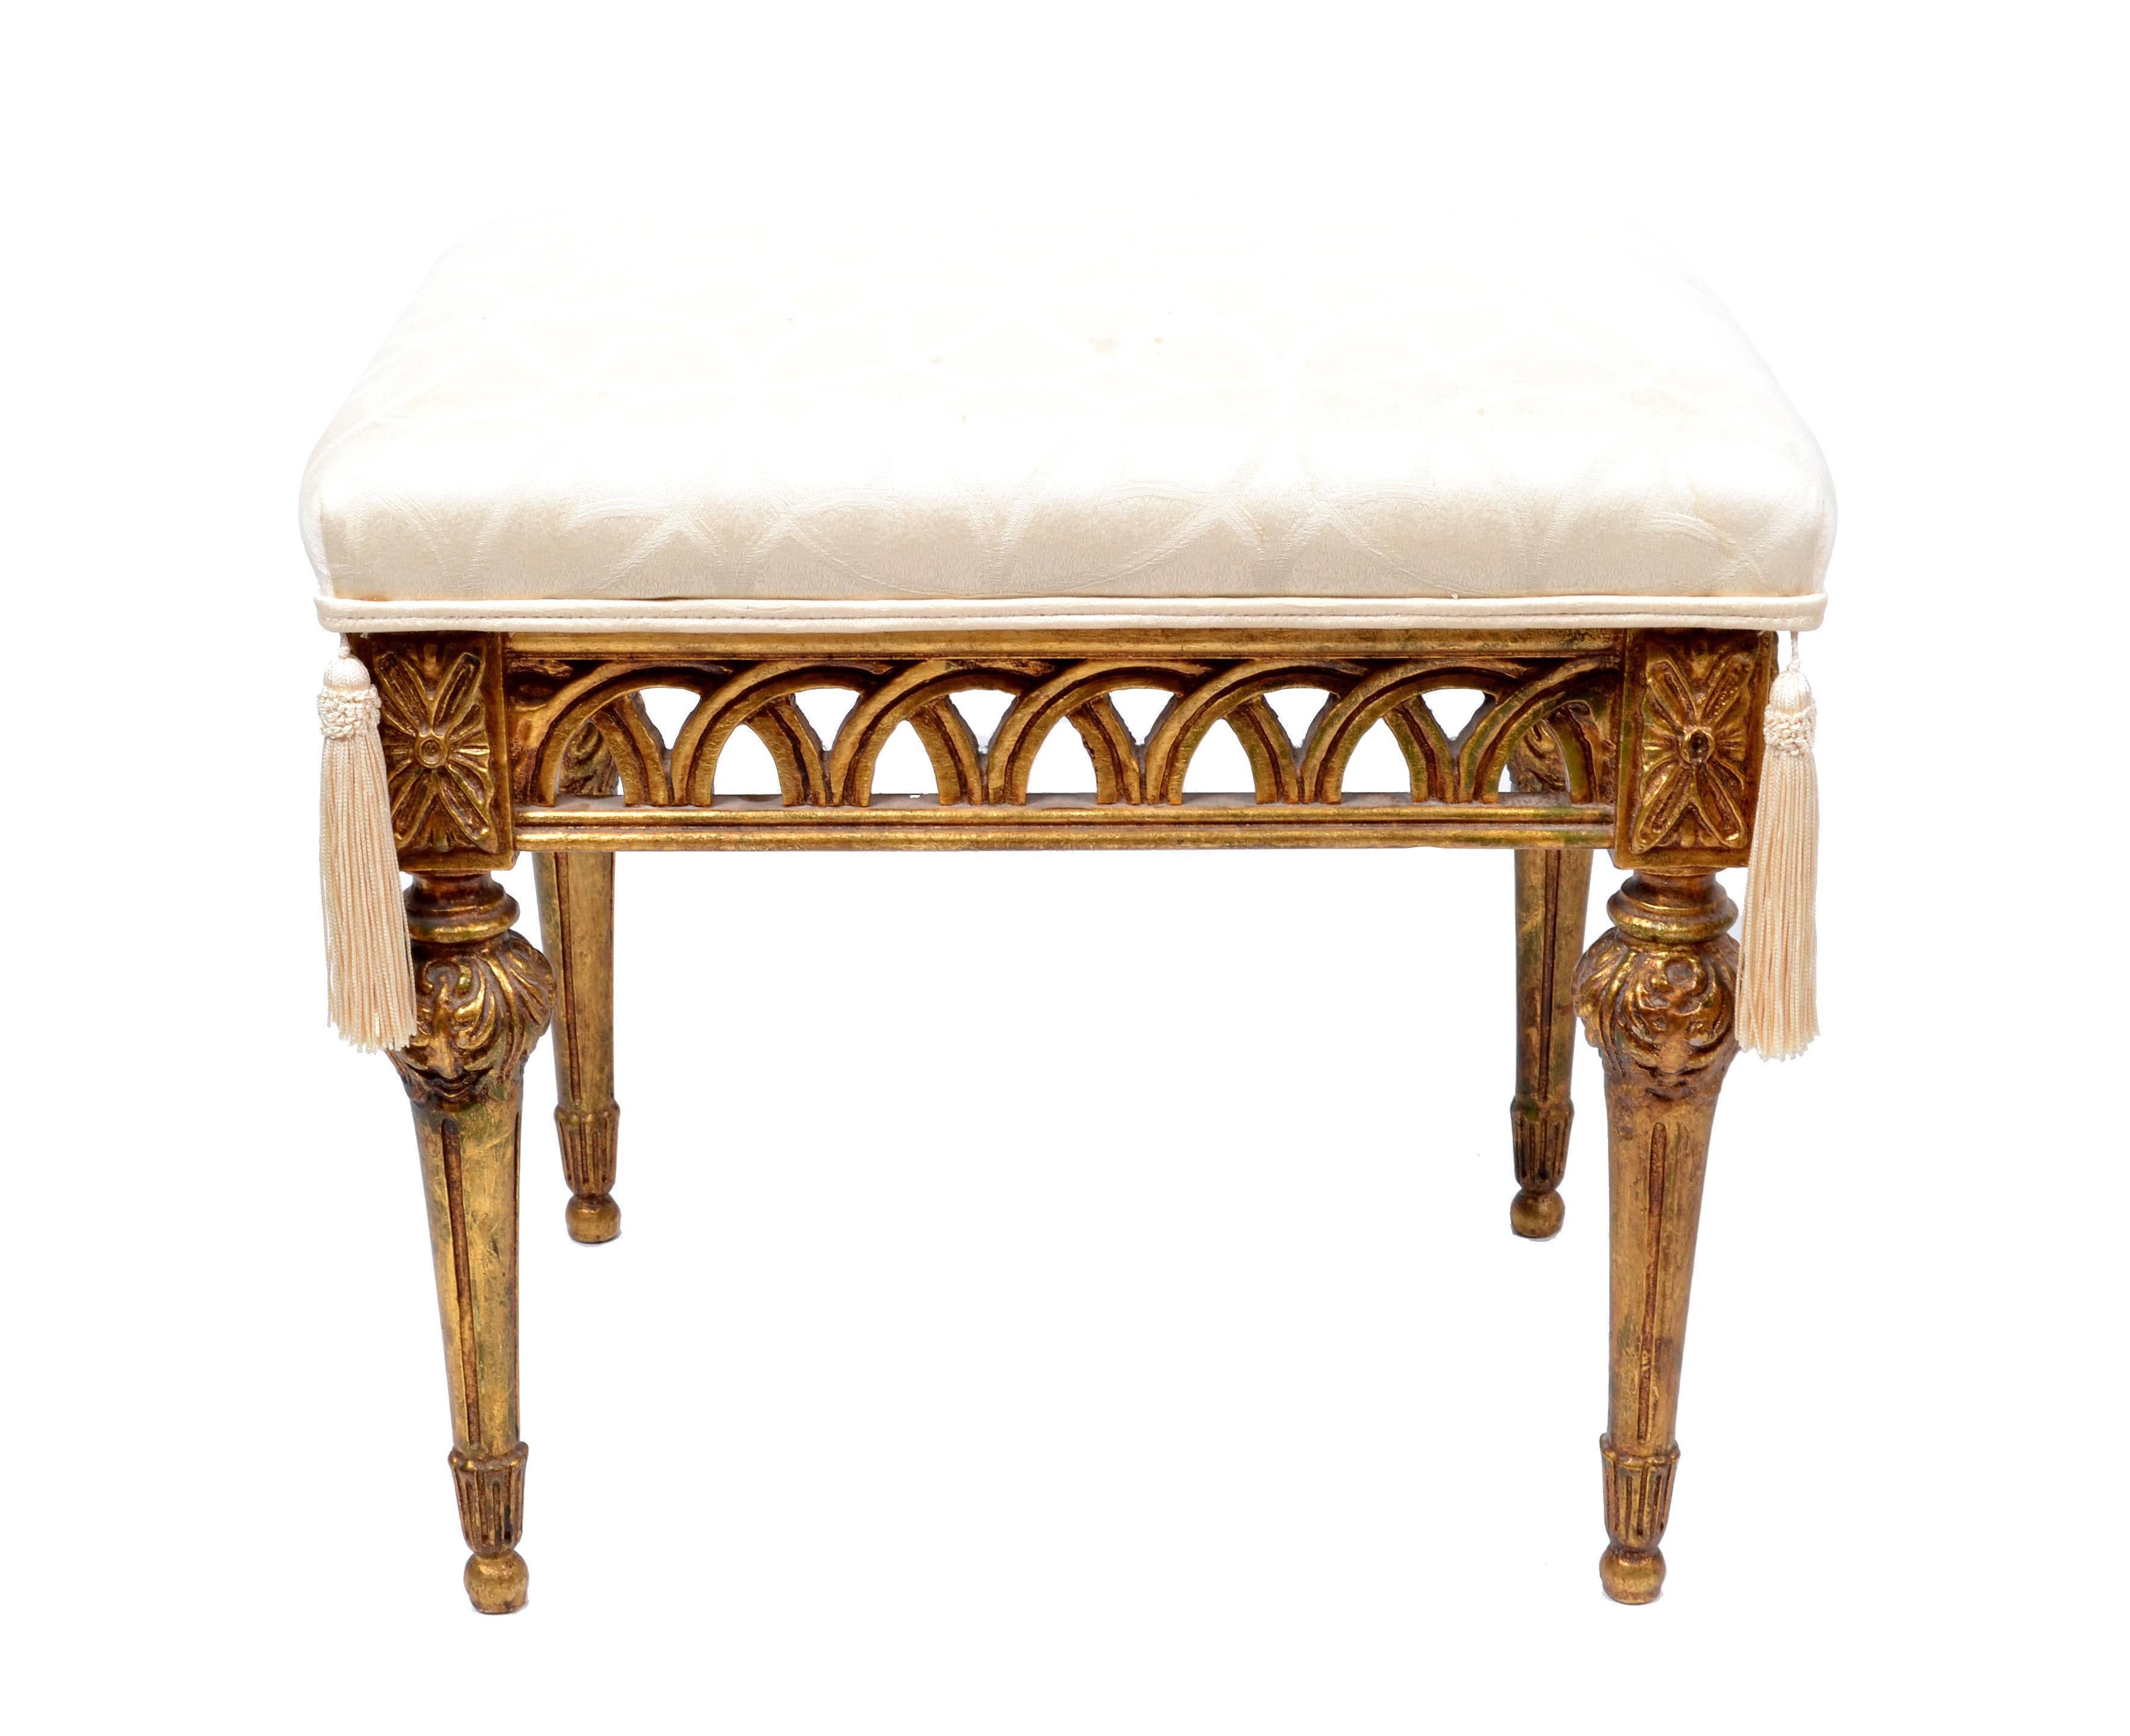 A pair of Italian stools in giltwood finish.
The original cream colored fabric is decorated with two tassels at the front.
This pair fits to any design and makes a great impression.